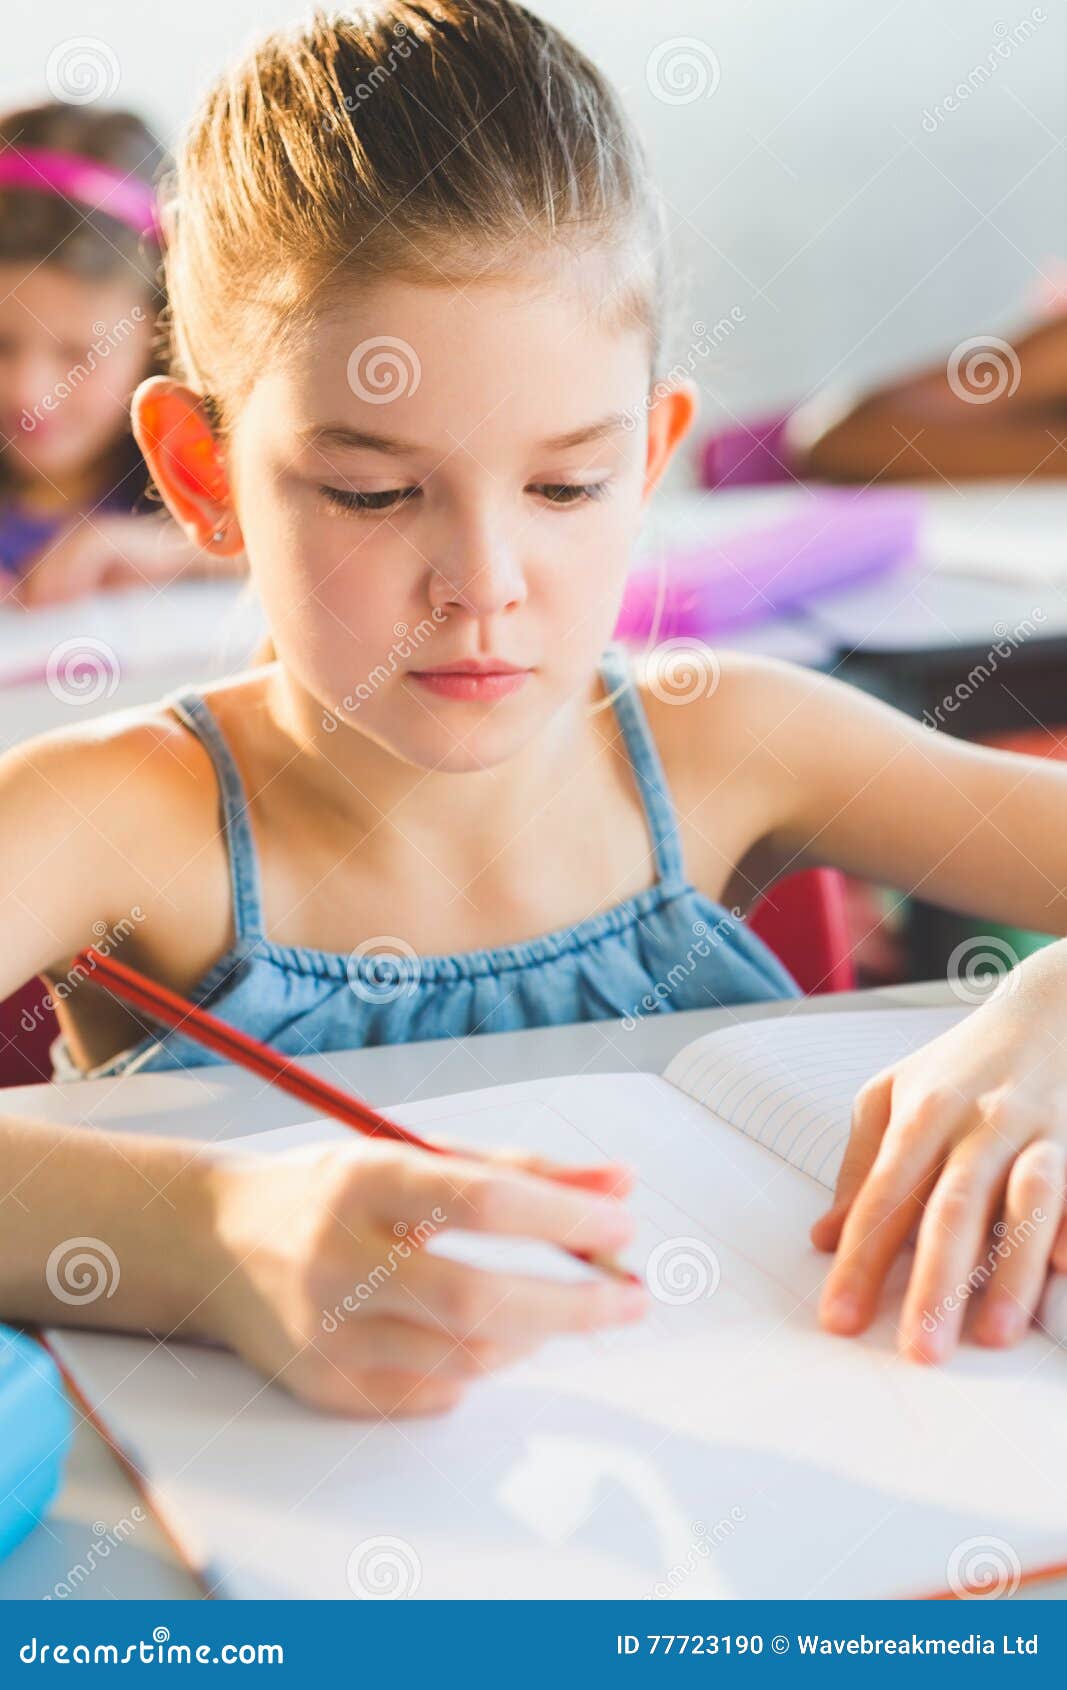 close-up of schoolkid doing homework in classroom